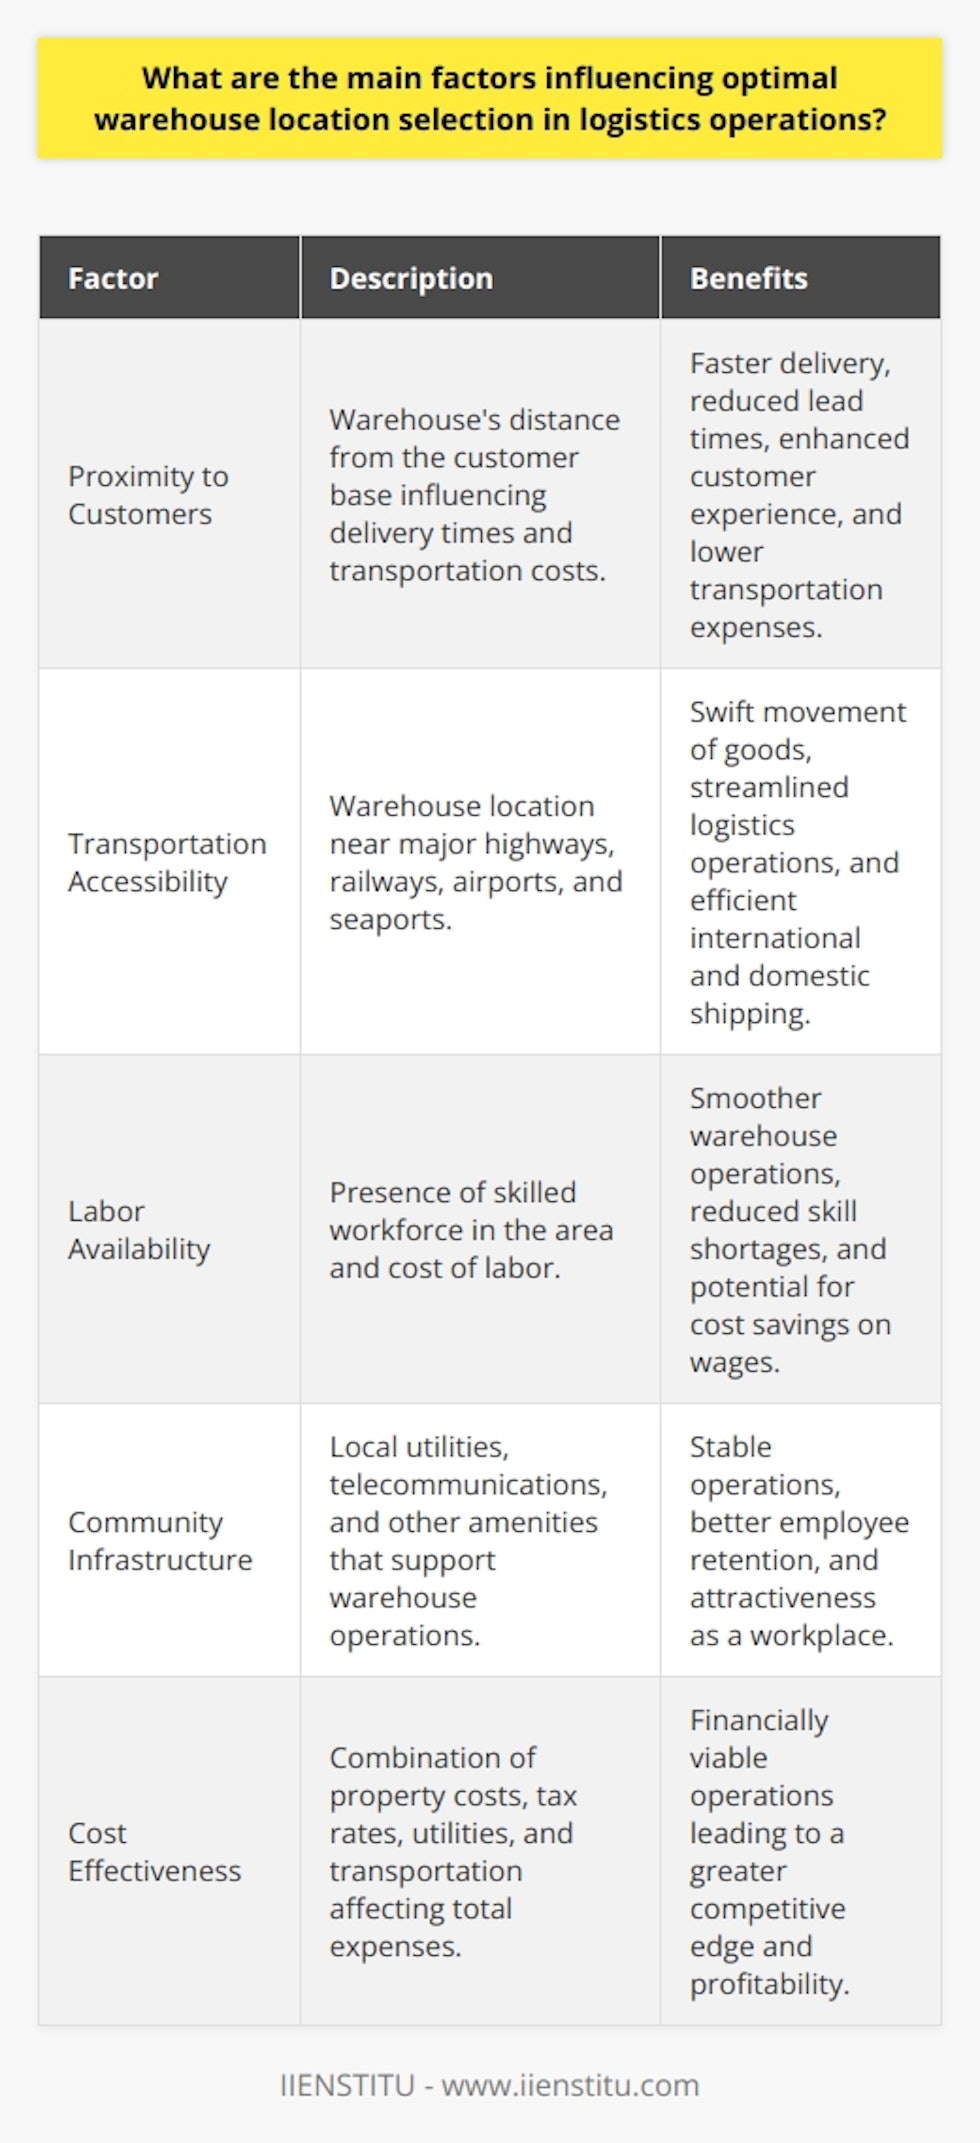 Selecting the optimal warehouse location is a critical decision in logistics strategy, as it significantly impacts operational efficiency and customer satisfaction. To ensure the best possible decision is made, key factors such as proximity to customers, transportation accessibility, labor availability, community infrastructure, and cost effectiveness must all be carefully weighed.PROXIMITY TO CUSTOMERSThe distance of a warehouse from the customer base influences delivery times and transportation costs. Closer proximity allows for faster delivery, reducing lead times and enhancing customer experience. The added benefit is a reduction in transportation expenses, which can account for a large portion of logistics costs.TRANSPORTATION ACCESSIBILITYAccess to a robust transportation network is another vital factor. An ideal warehouse is situated at the nexus of major highways, railways, and near seaports or airports for both domestic and international shipping. This accessibility ensures the swift movement of goods in and out of the facility, leading to more streamlined logistics operations.LABOR AVAILABILITYWithout a skilled workforce, warehouse operations can face significant hurdles. When selecting a location, the availability of a competent labor pool is paramount, as is the cost of labor in the area. High labor costs could make an otherwise favorable location less desirable due to the impact on the bottom line.COMMUNITY INFRASTRUCTUREInfrastructure extends beyond just transportation. Local utilities, telecommunications, and amenities can affect warehouse operations and the ability to attract and retain employees. A location with a solid infrastructure supports operational needs and contributes to the overall appeal of the workspace for potential employees.COST EFFECTIVENESSAll the above factors influence the cost effectiveness of a warehouse location. Lower property acquisition and development costs, reasonable local tax rates, affordable utilities, and cost-efficient transportation can combine to create a financially viable warehouse location.By taking a strategic approach to identifying and evaluating these factors, businesses can select a warehouse location that not only meets their logistical needs but also contributes to improved operational efficiency and customer satisfaction. Taking the time to analyze and integrate these considerations can lead to a significant competitive edge in a company's logistics operations.